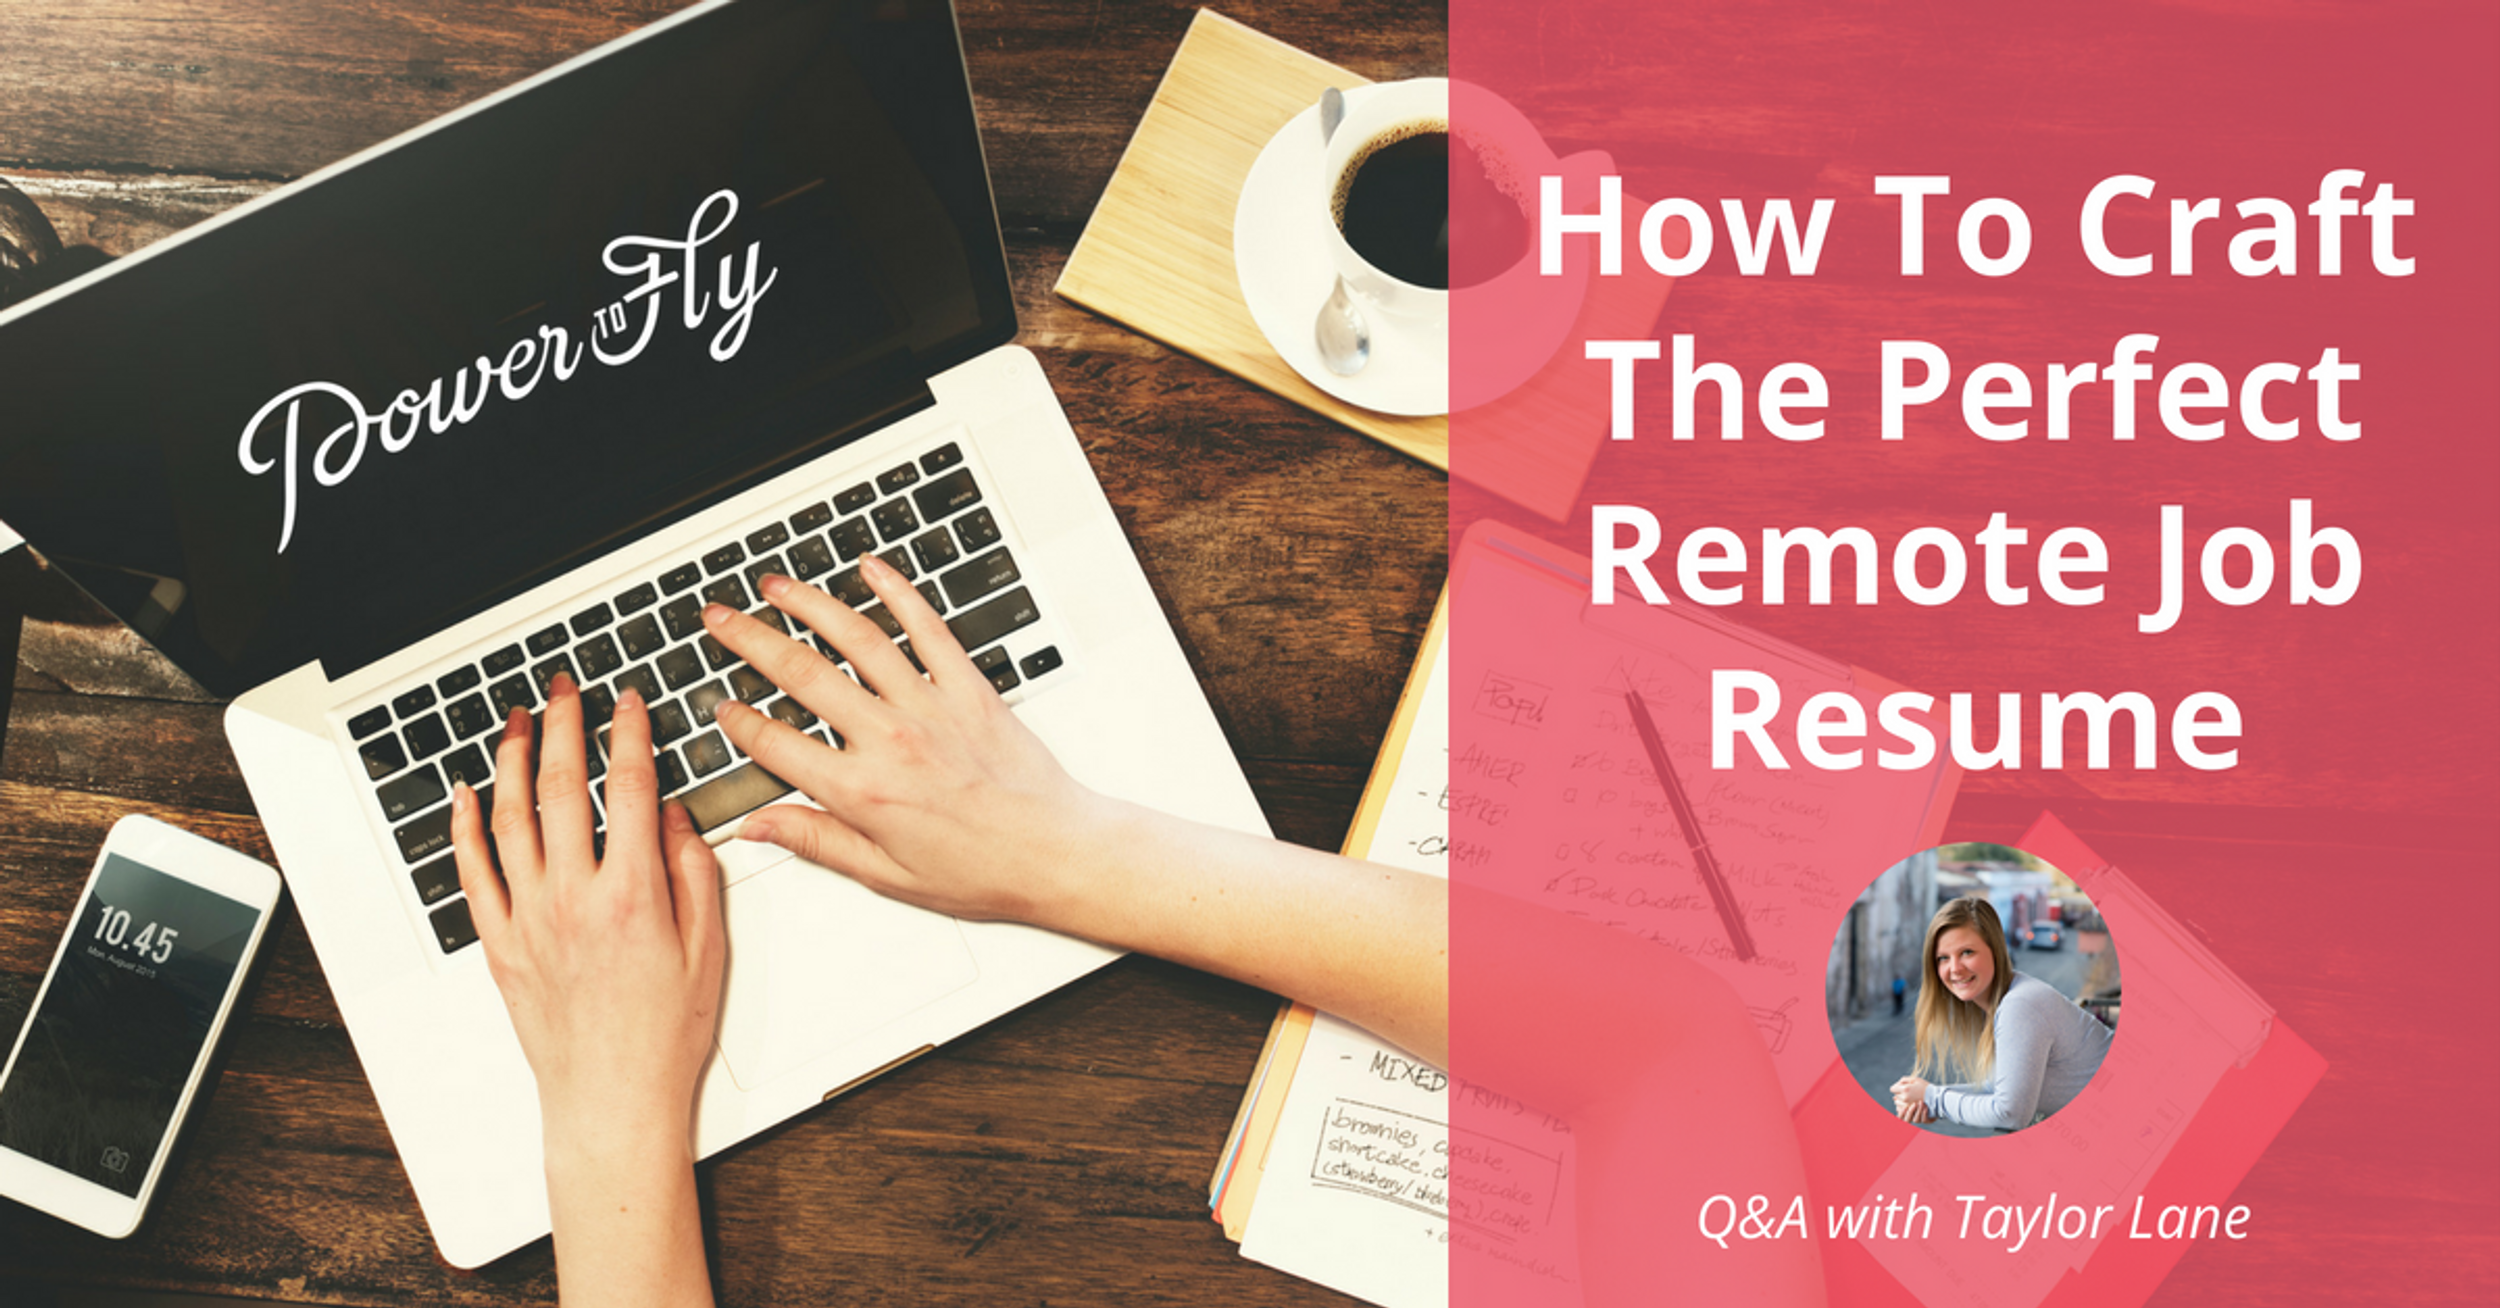 How To Craft The Perfect Remote Job Resume